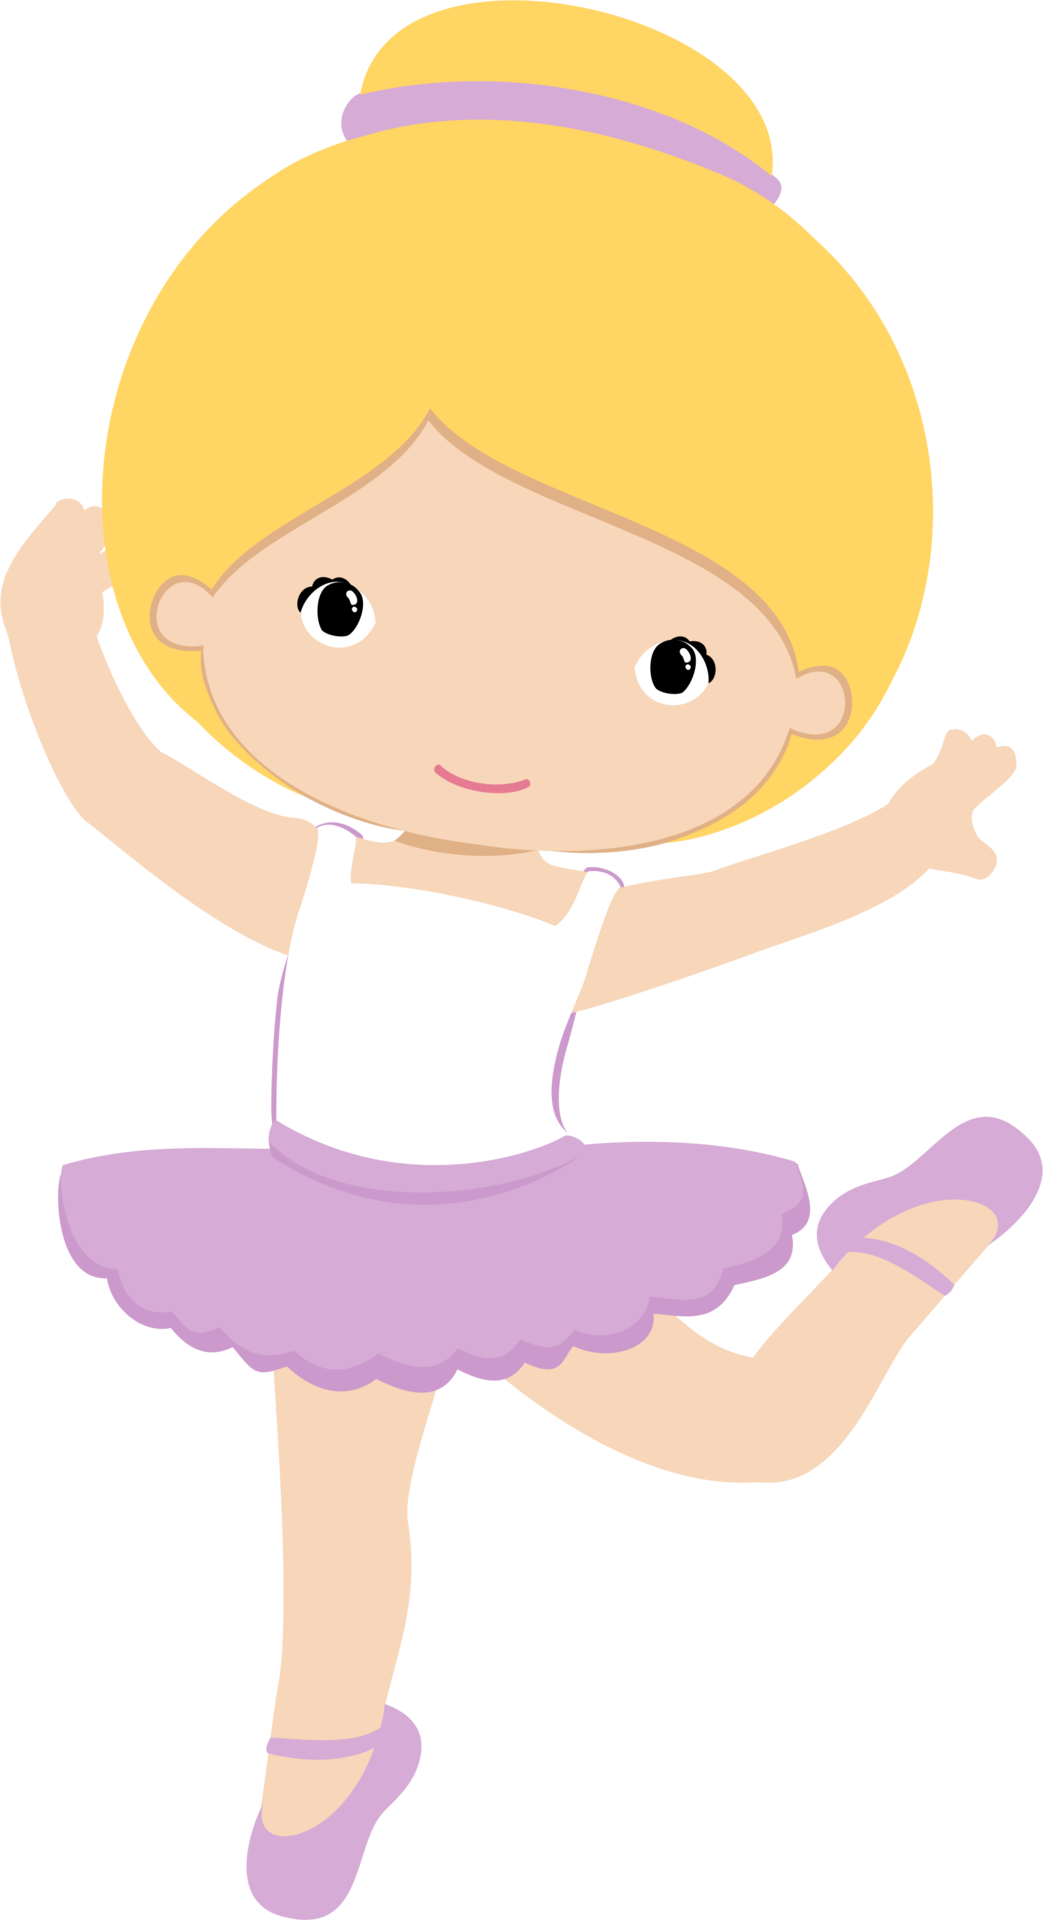 Pin by marina on. Gymnast clipart flexible